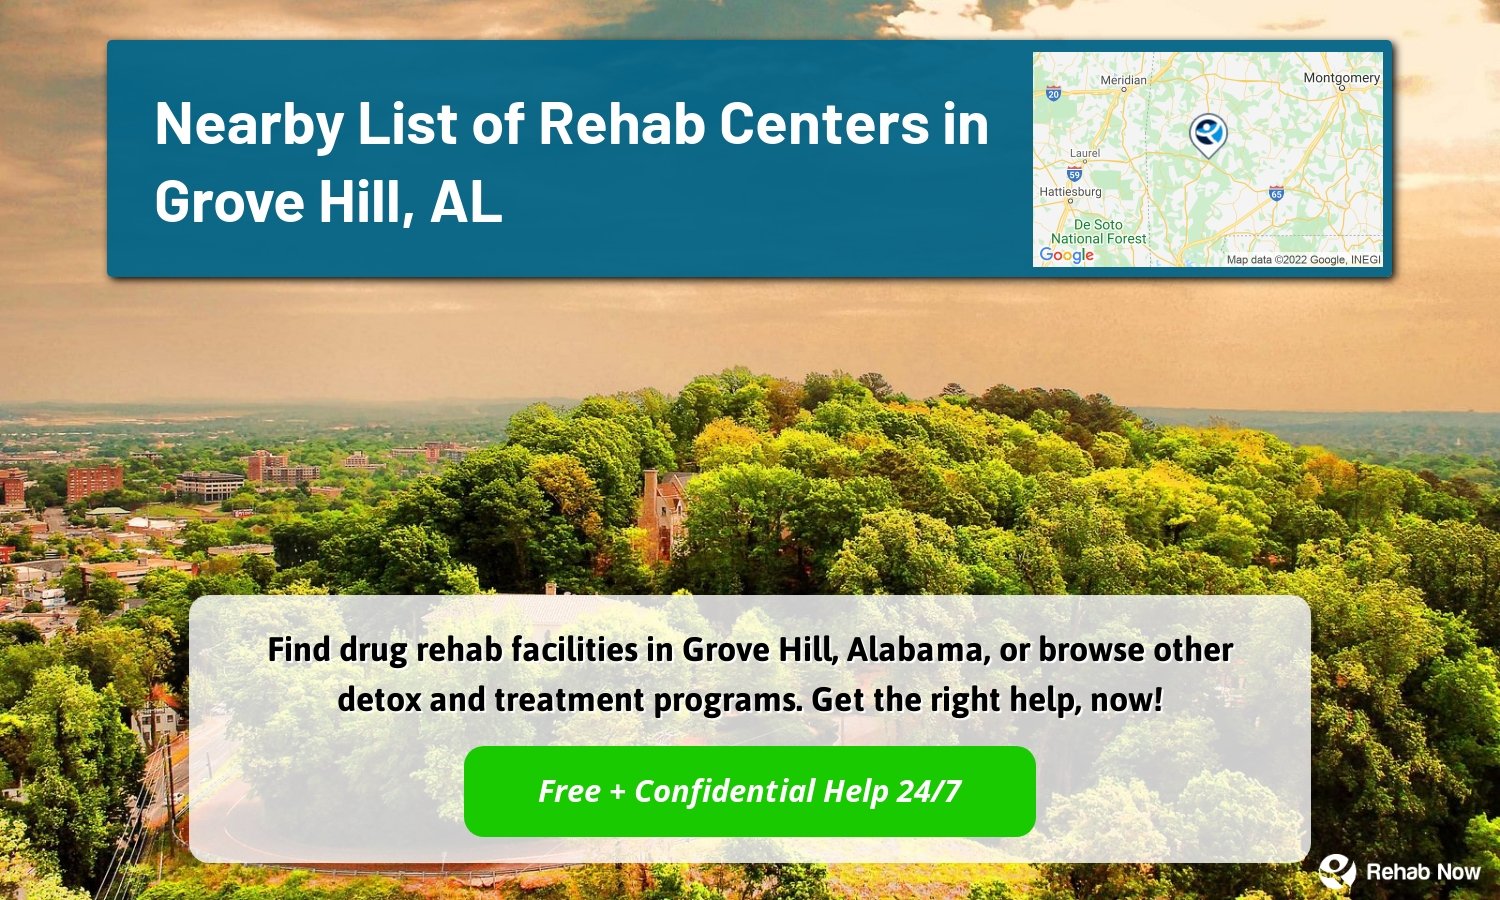 Find drug rehab facilities in Grove Hill, Alabama, or browse other detox and treatment programs. Get the right help, now!